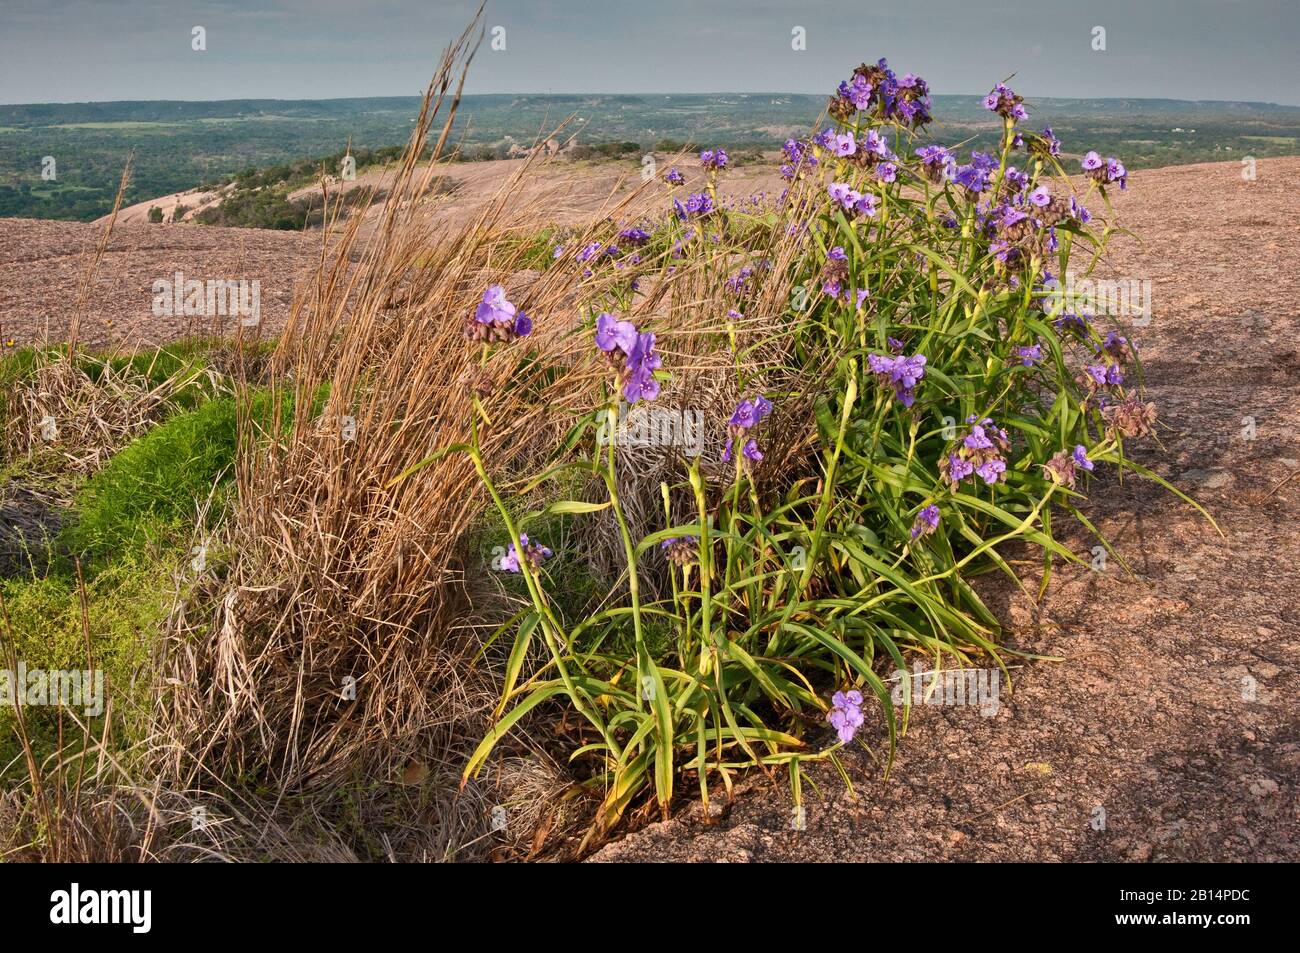 Spiderwort flowers blooming in springtime at vernal pool at main dome in Enchanted Rock State Natural Area in Hill Country near Fredericksburg, Texas Stock Photo